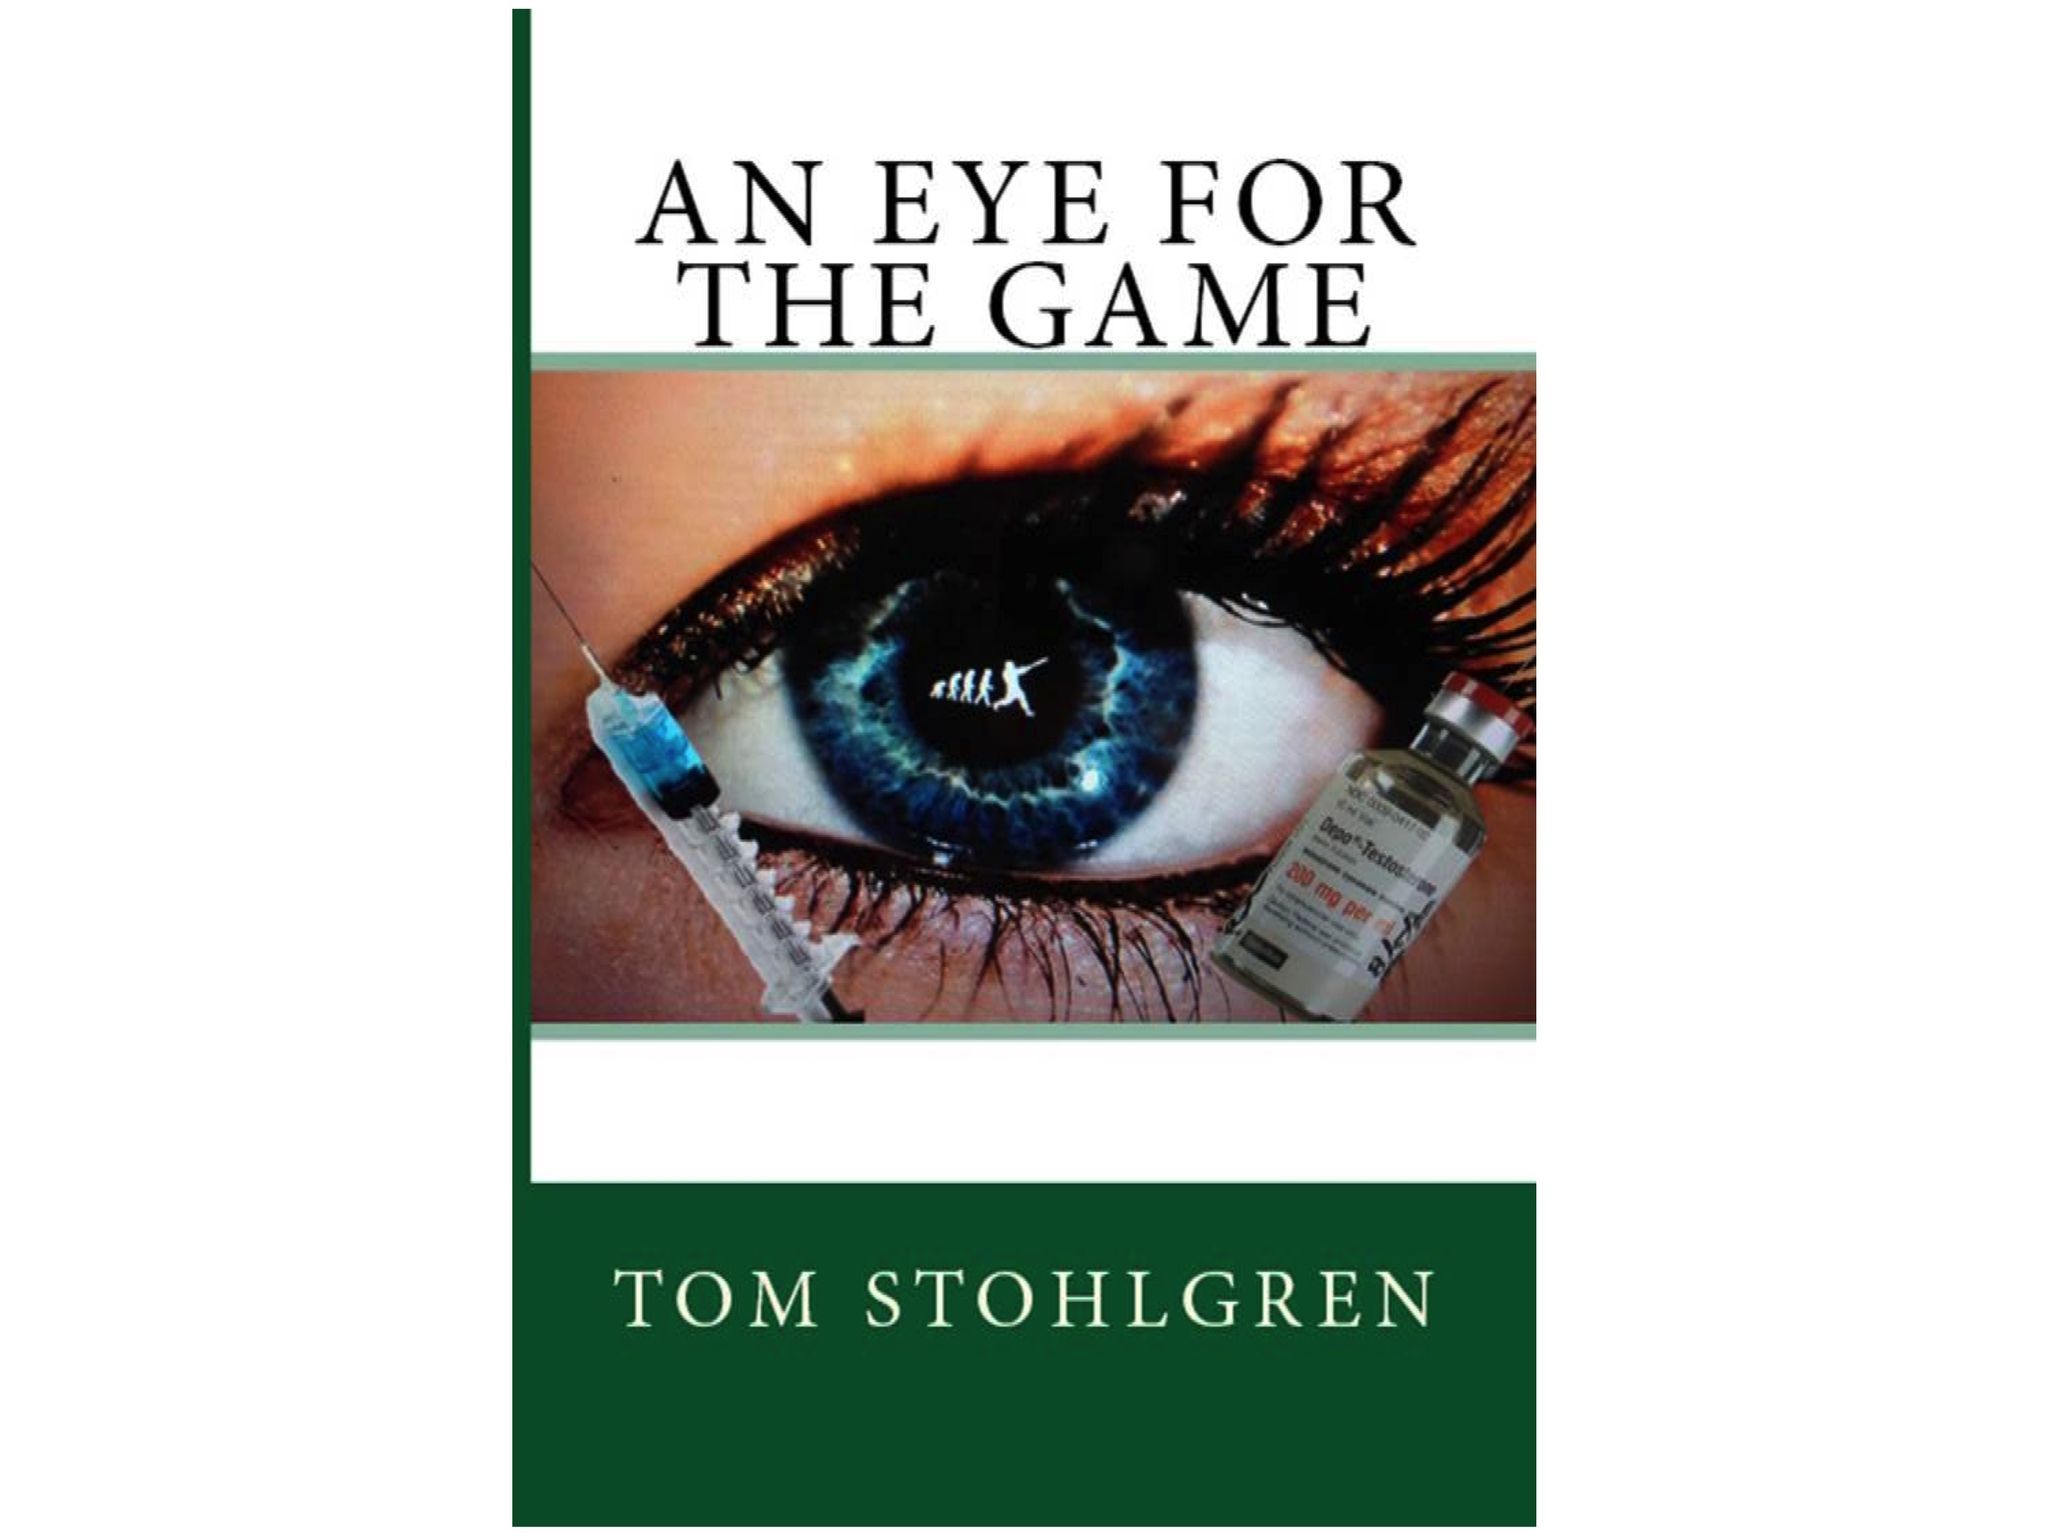 AN EYE FOR THE GAME